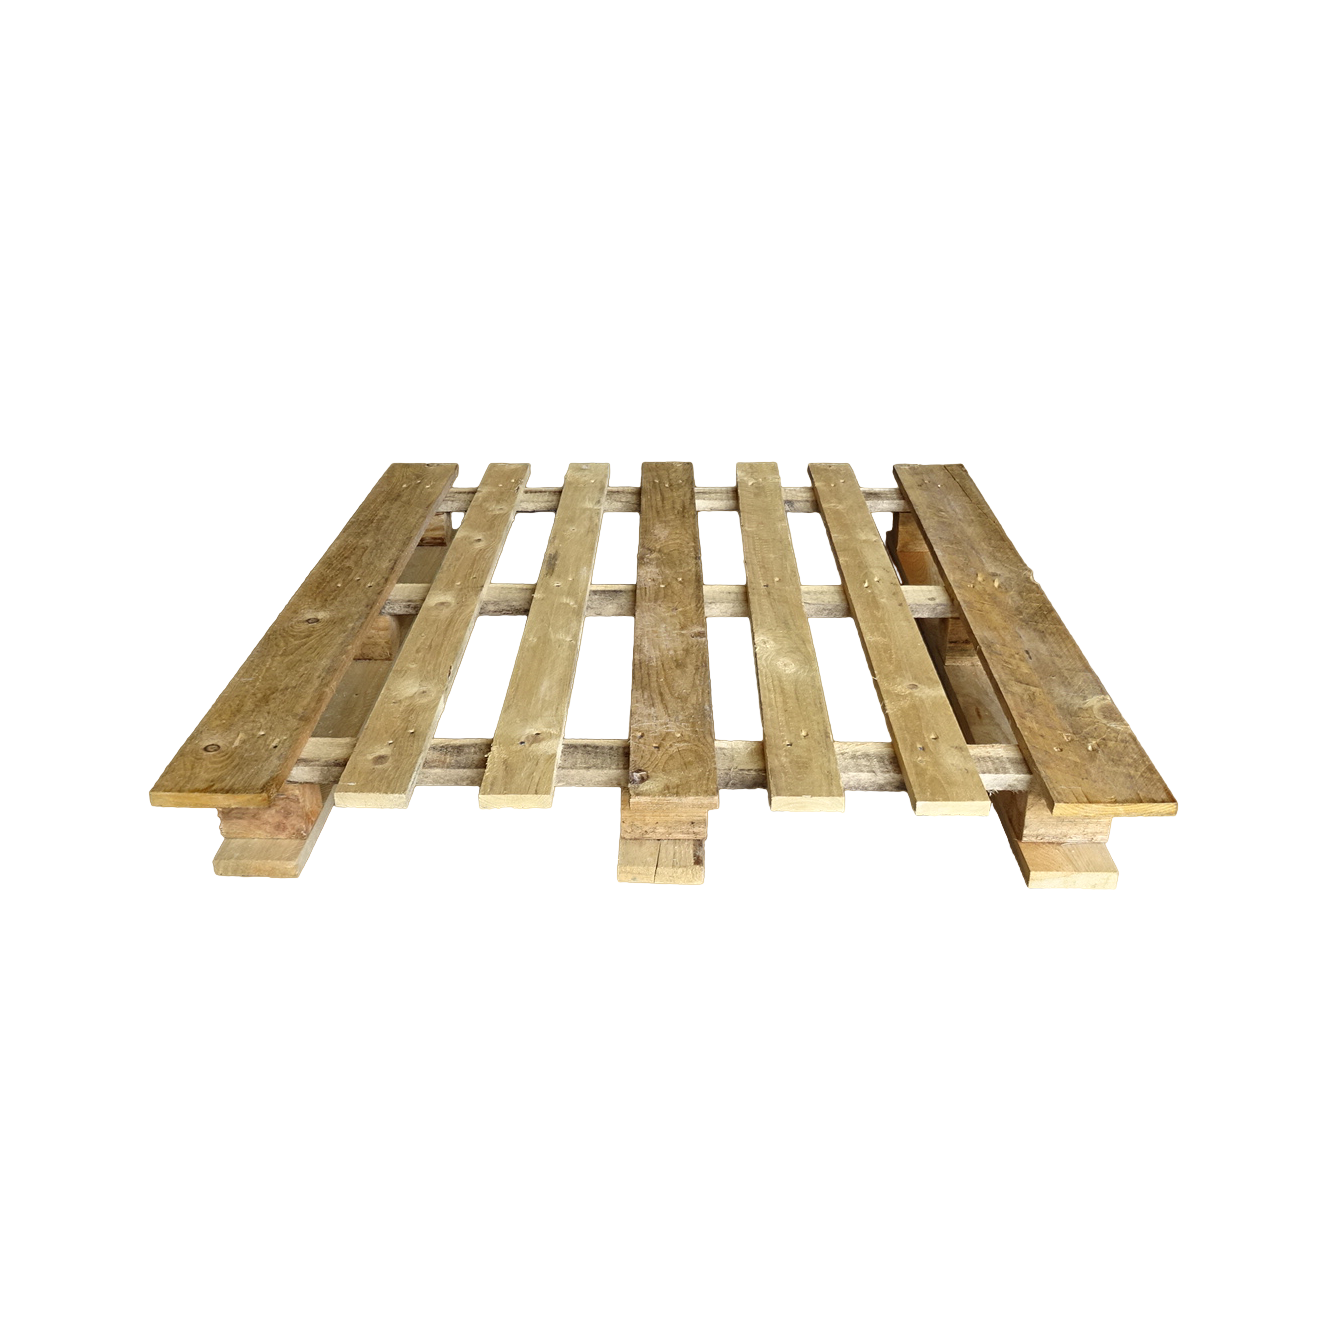 https://www.ribopallets.com/wp-content/uploads/2020/06/Pallet-in-legno-110x130-falso-cp4-1.png